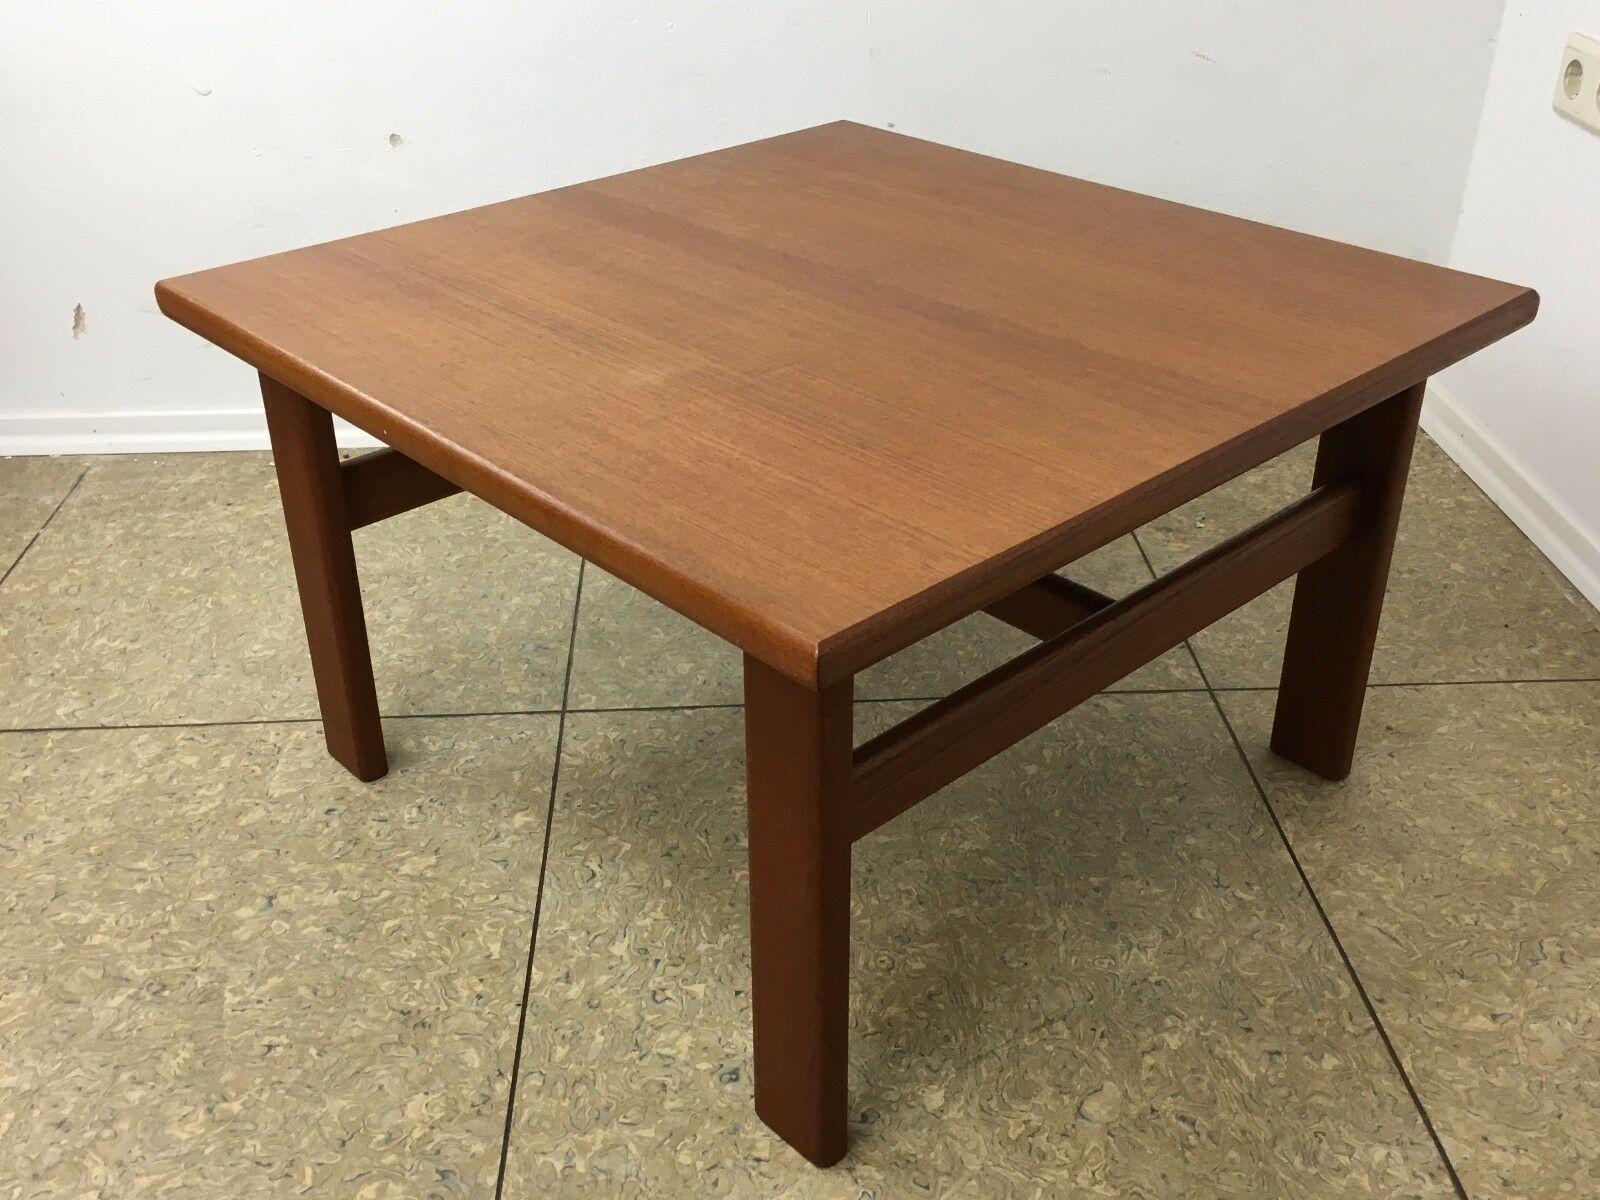 70s teak coffee table Danish Design Denmark Mid Century

Object: coffee table

Manufacturer:

Condition: good

Age: around 1960-1970

Dimensions:

72cm x 72cm x 43cm

Other notes:

The pictures serve as part of the